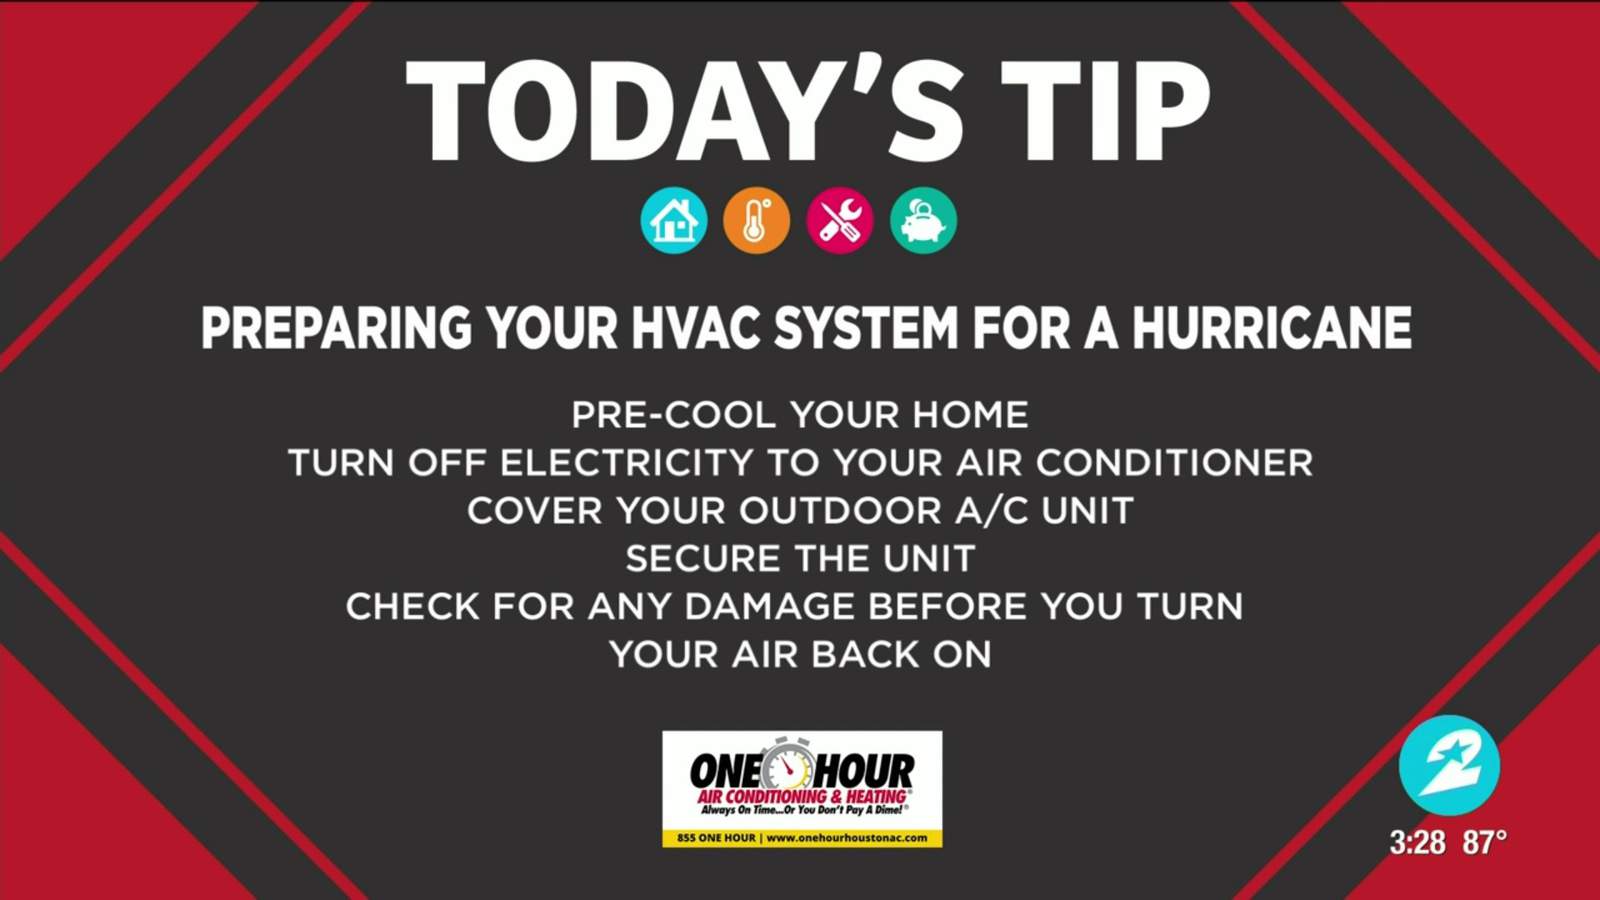 Tip Tuesday: Tips for preparing your home and HVAC system for hurricanes